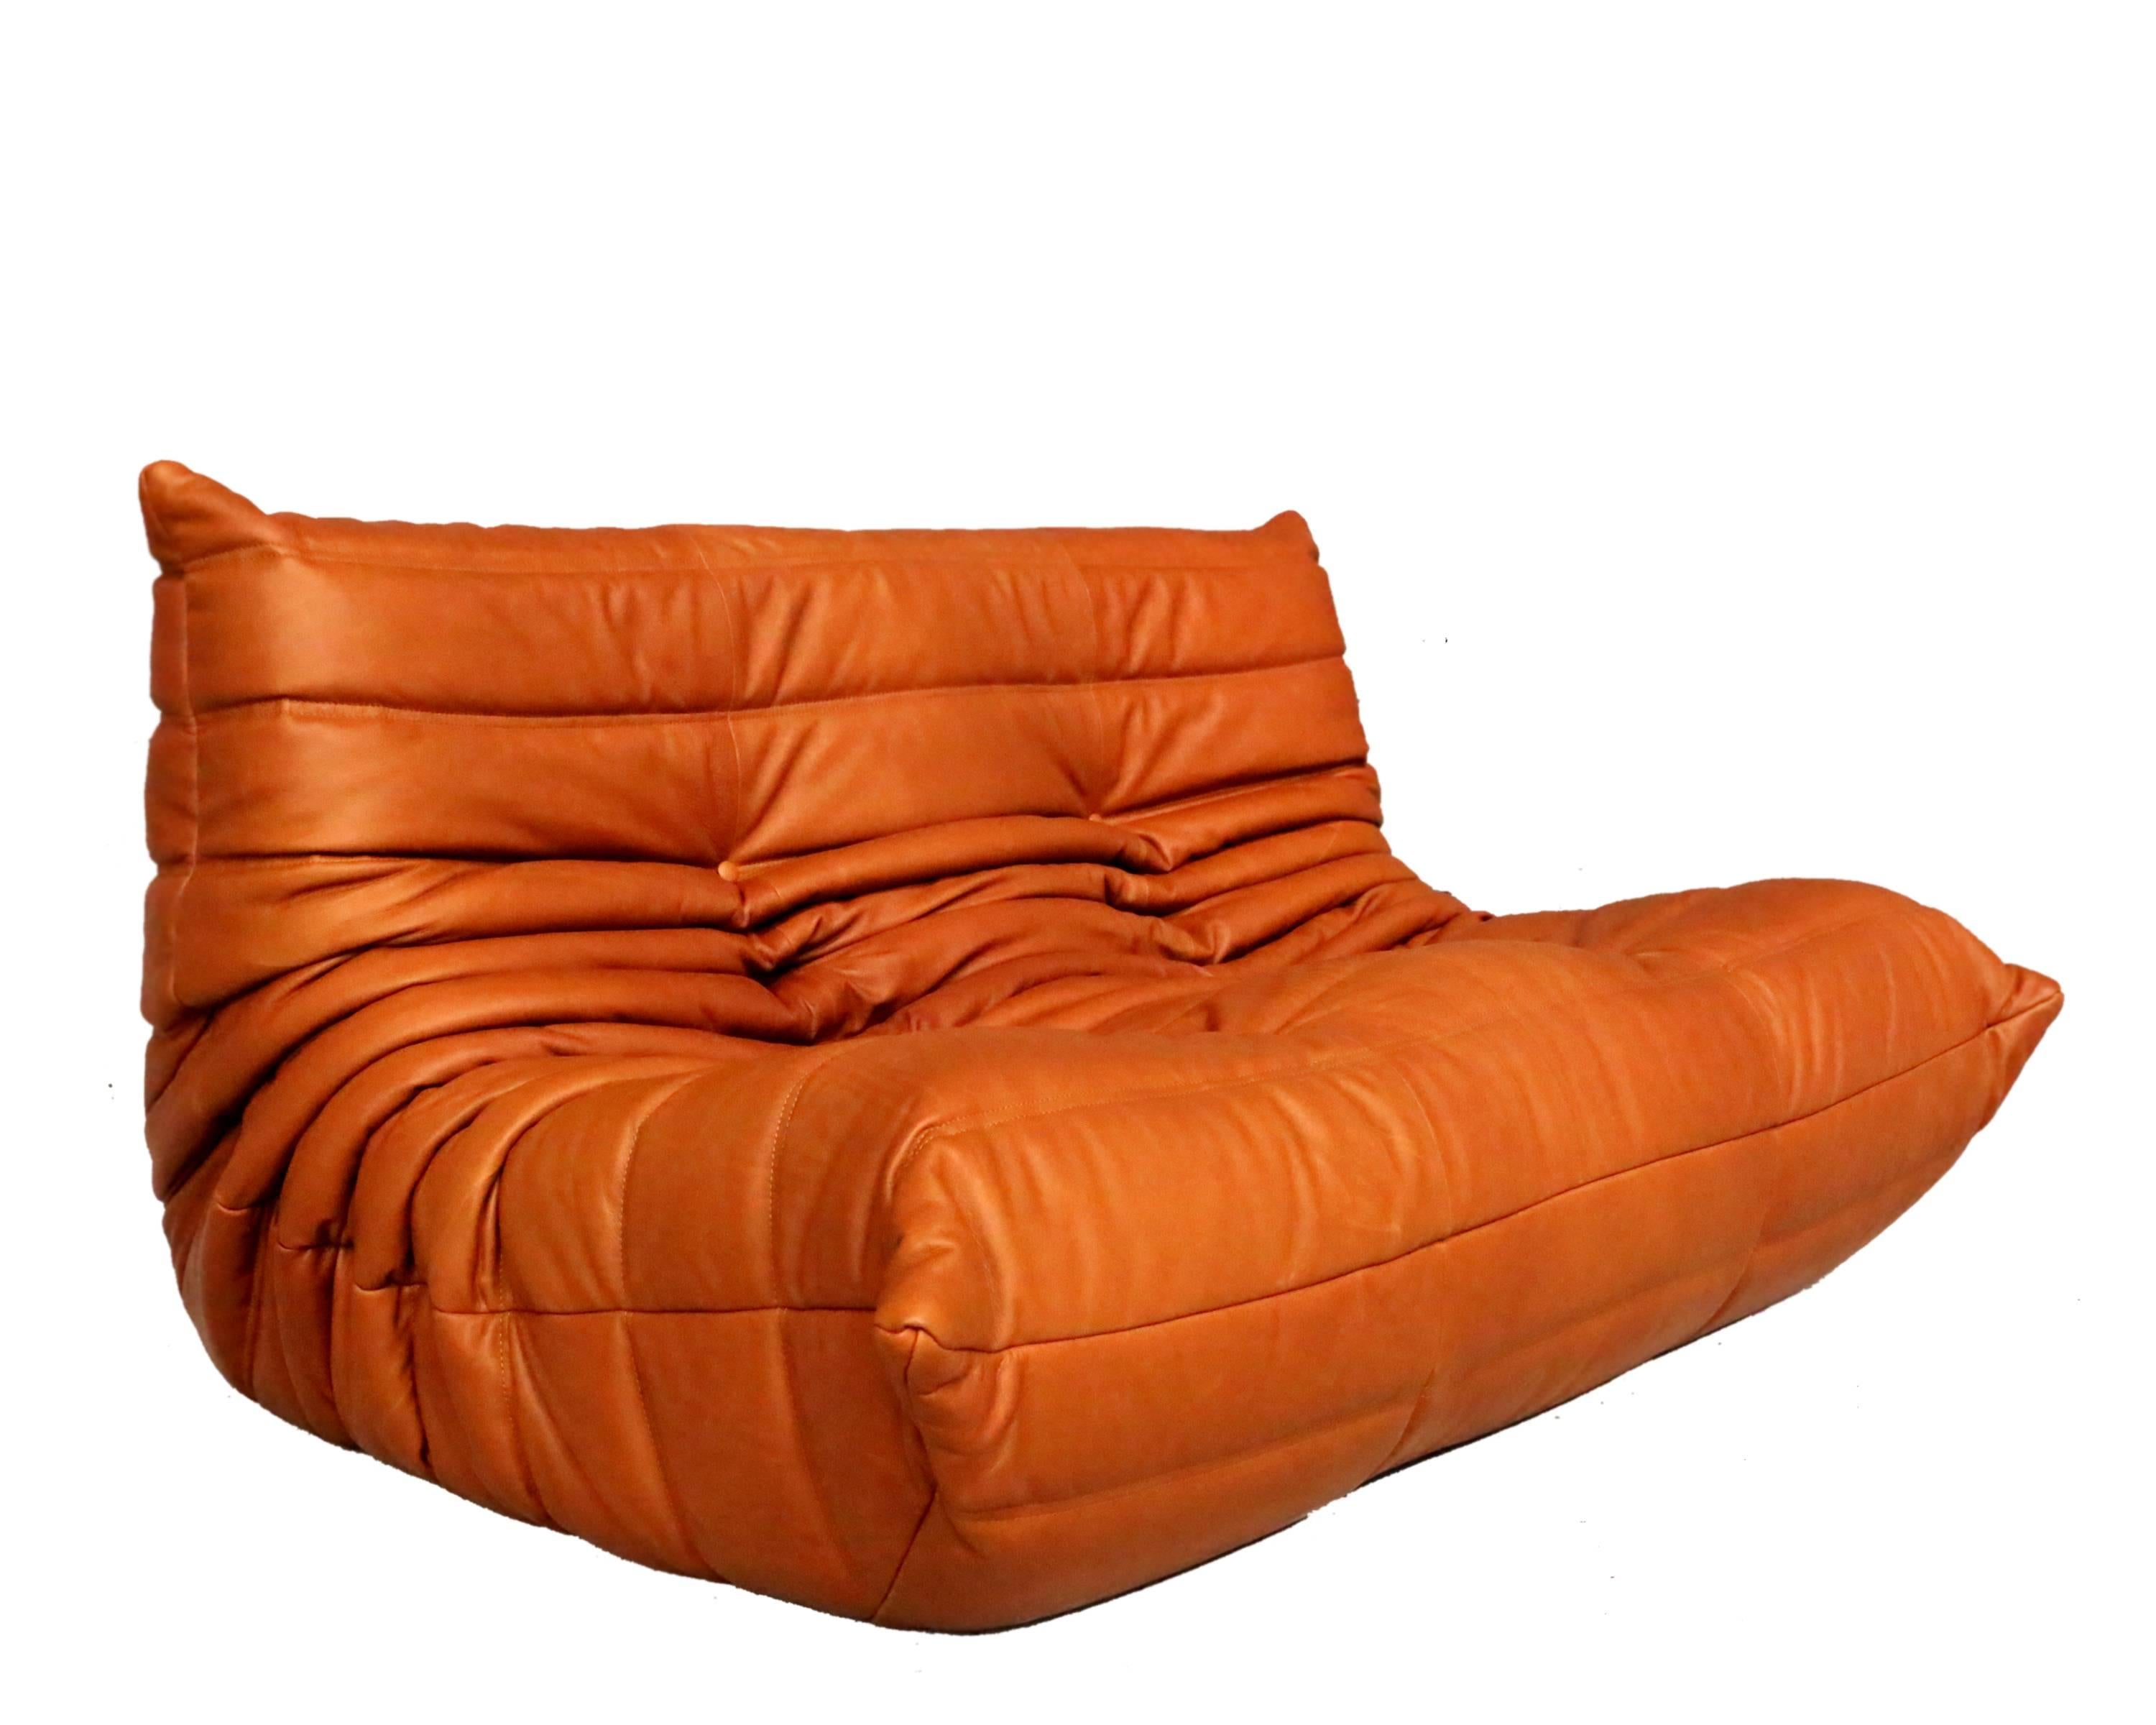 Post-Modern Vintage Togo Sofa Set in our signature Vegetaly high quality full grain leather